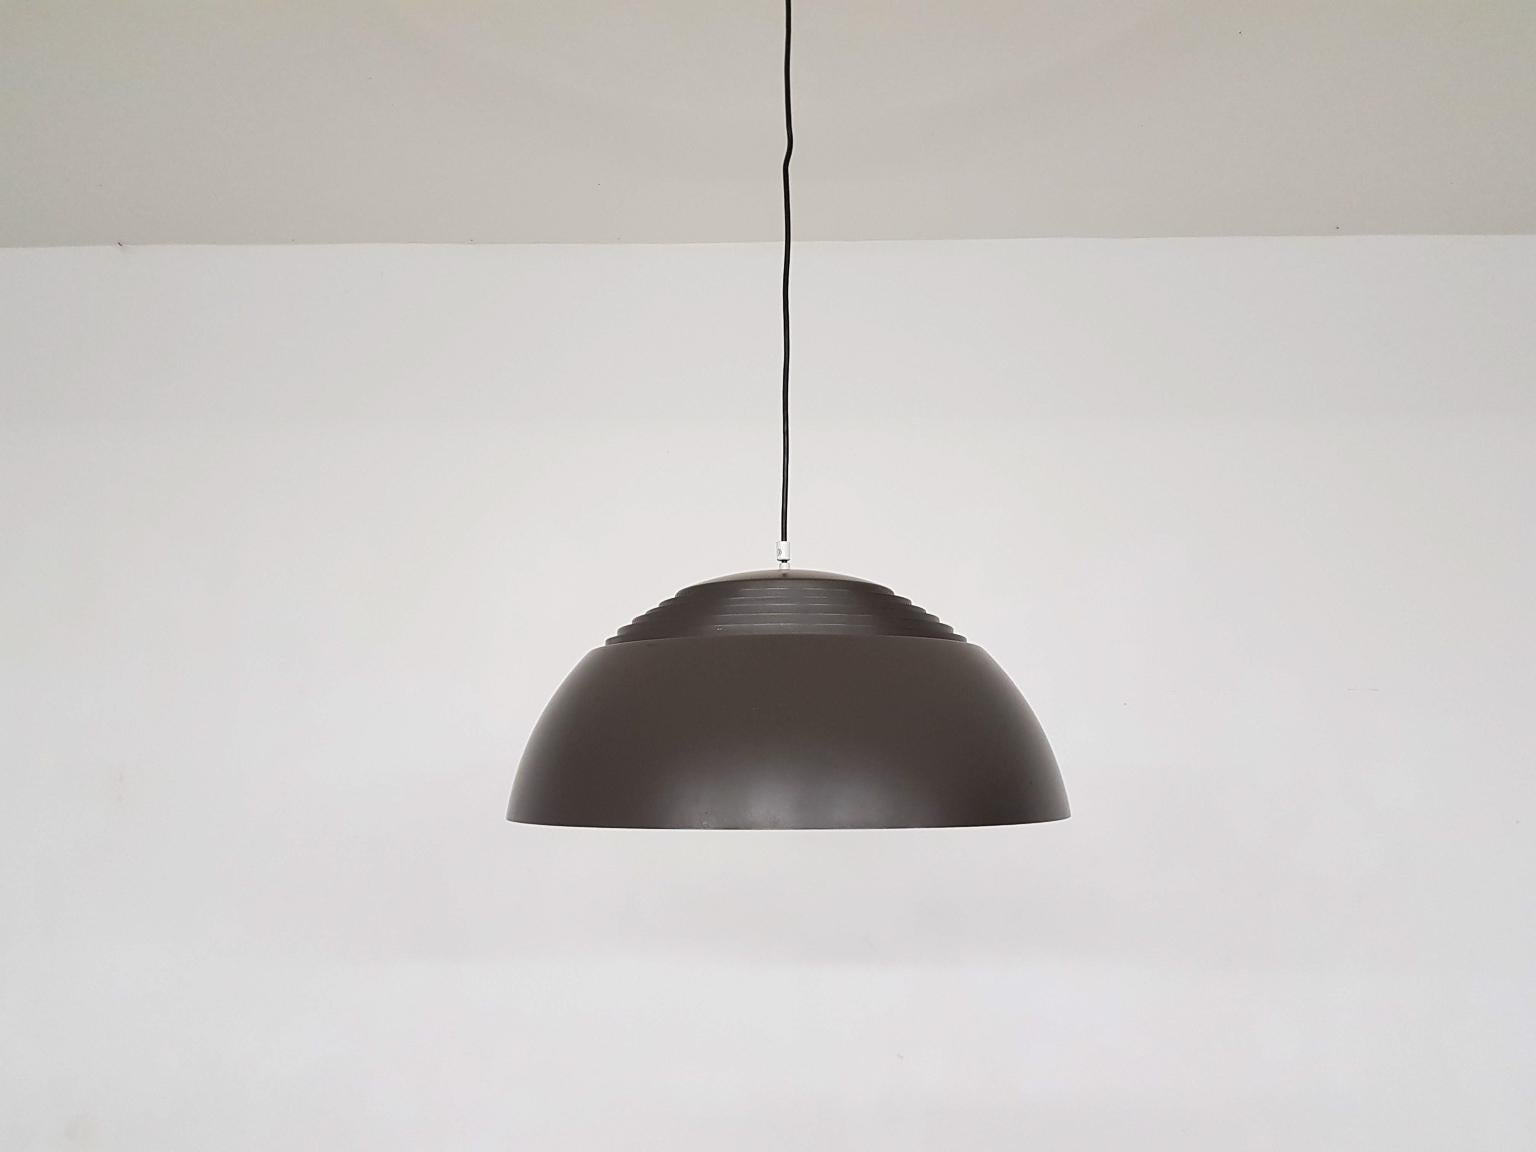 Arne Jacobsen for Louis Poulsen A.J. Royal pendent lamp, Denmark, 1957

Brown metal pendant lamp or chandelier. Originally designed for the SAS Royal hotel in Copenhagen by Arne Jacobsen.
For four light bulbs, one in the middle and three at the